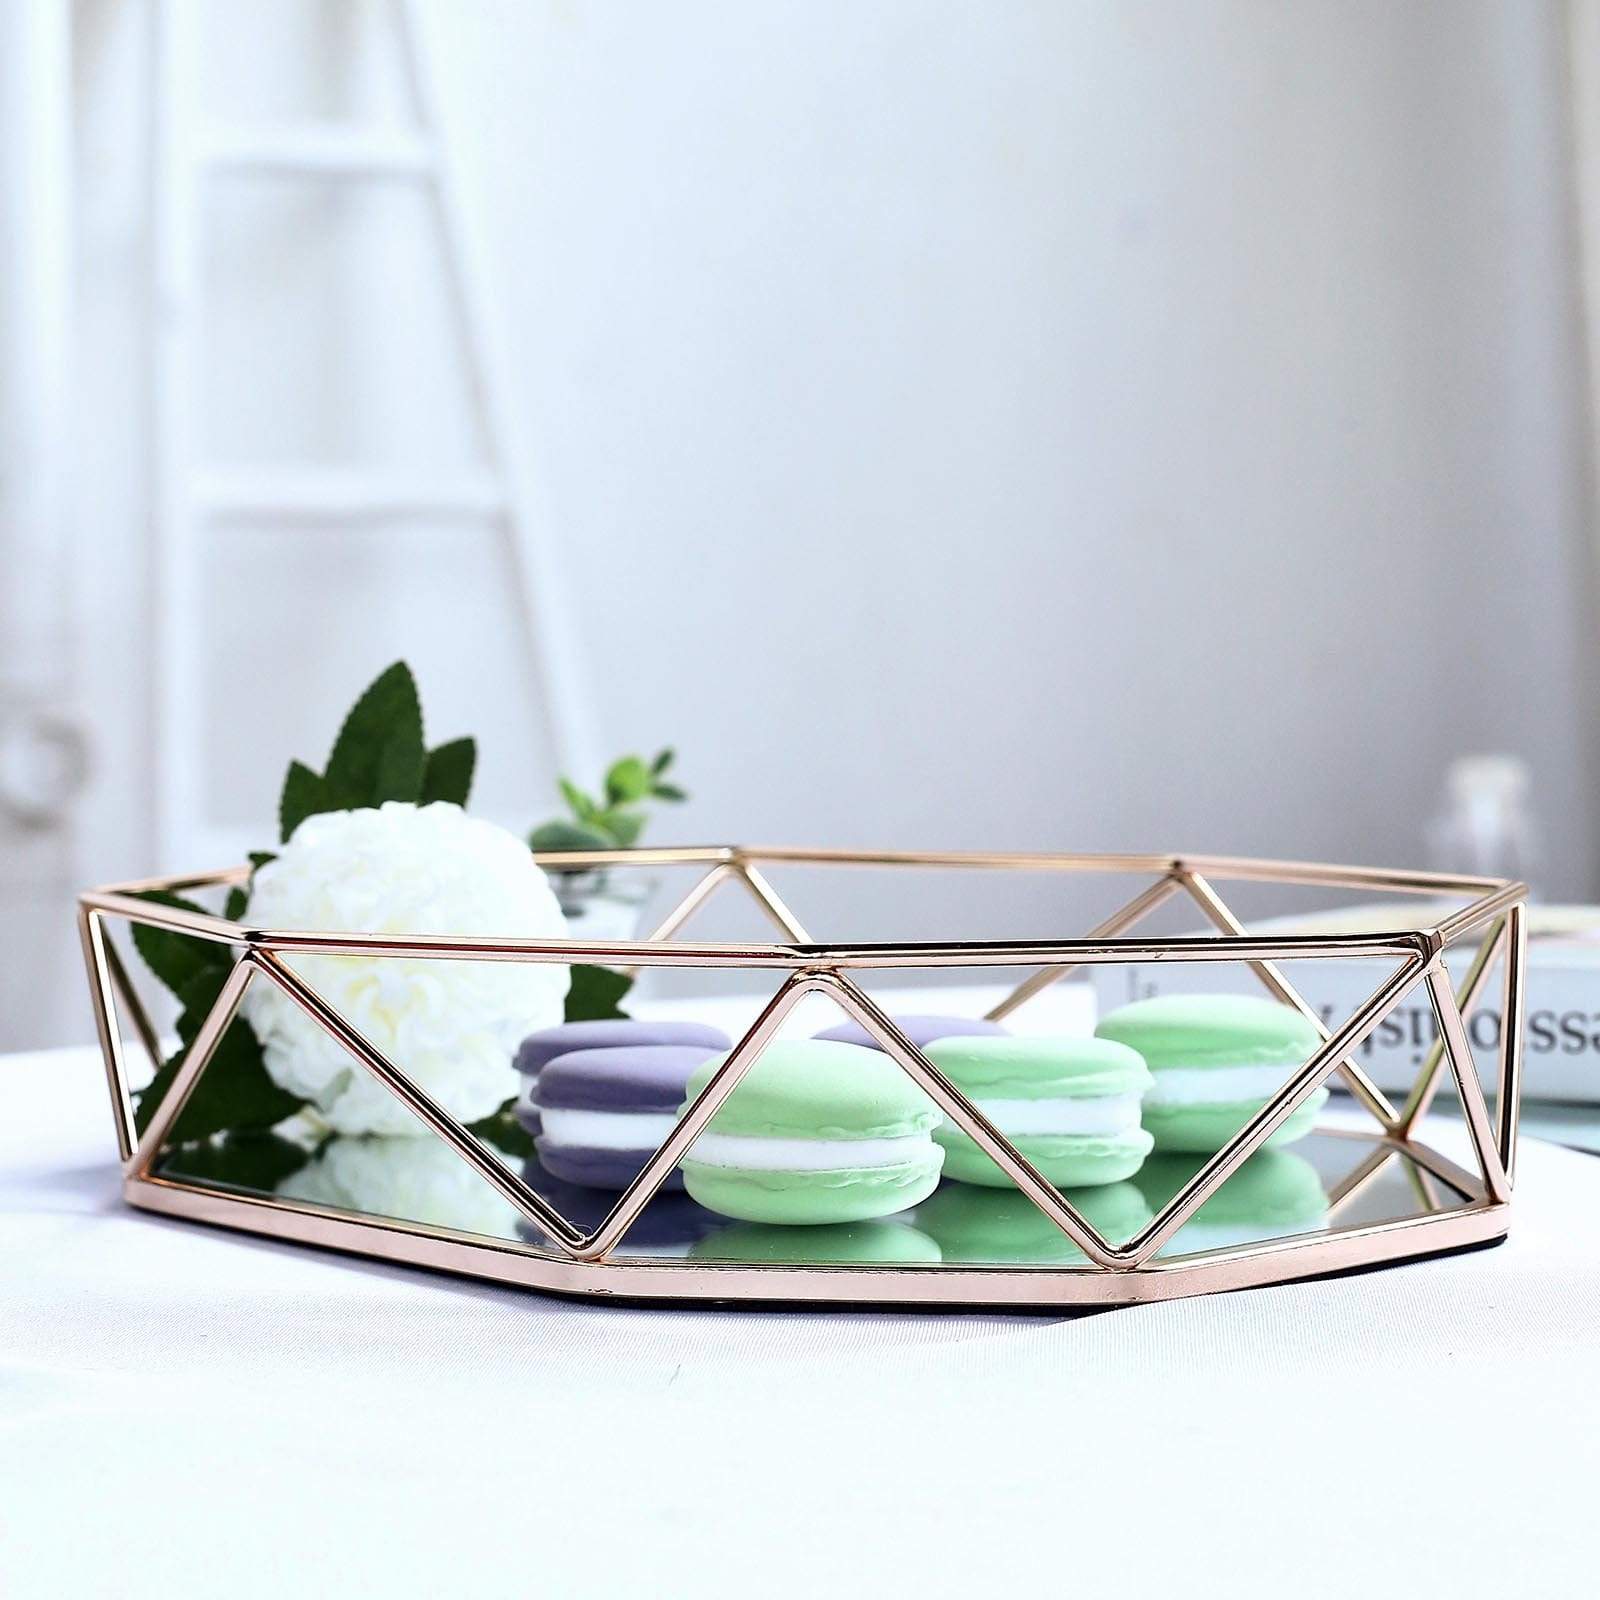 Gold 14x9 in Mirrored Metal Geometric Decorative Serving Tray